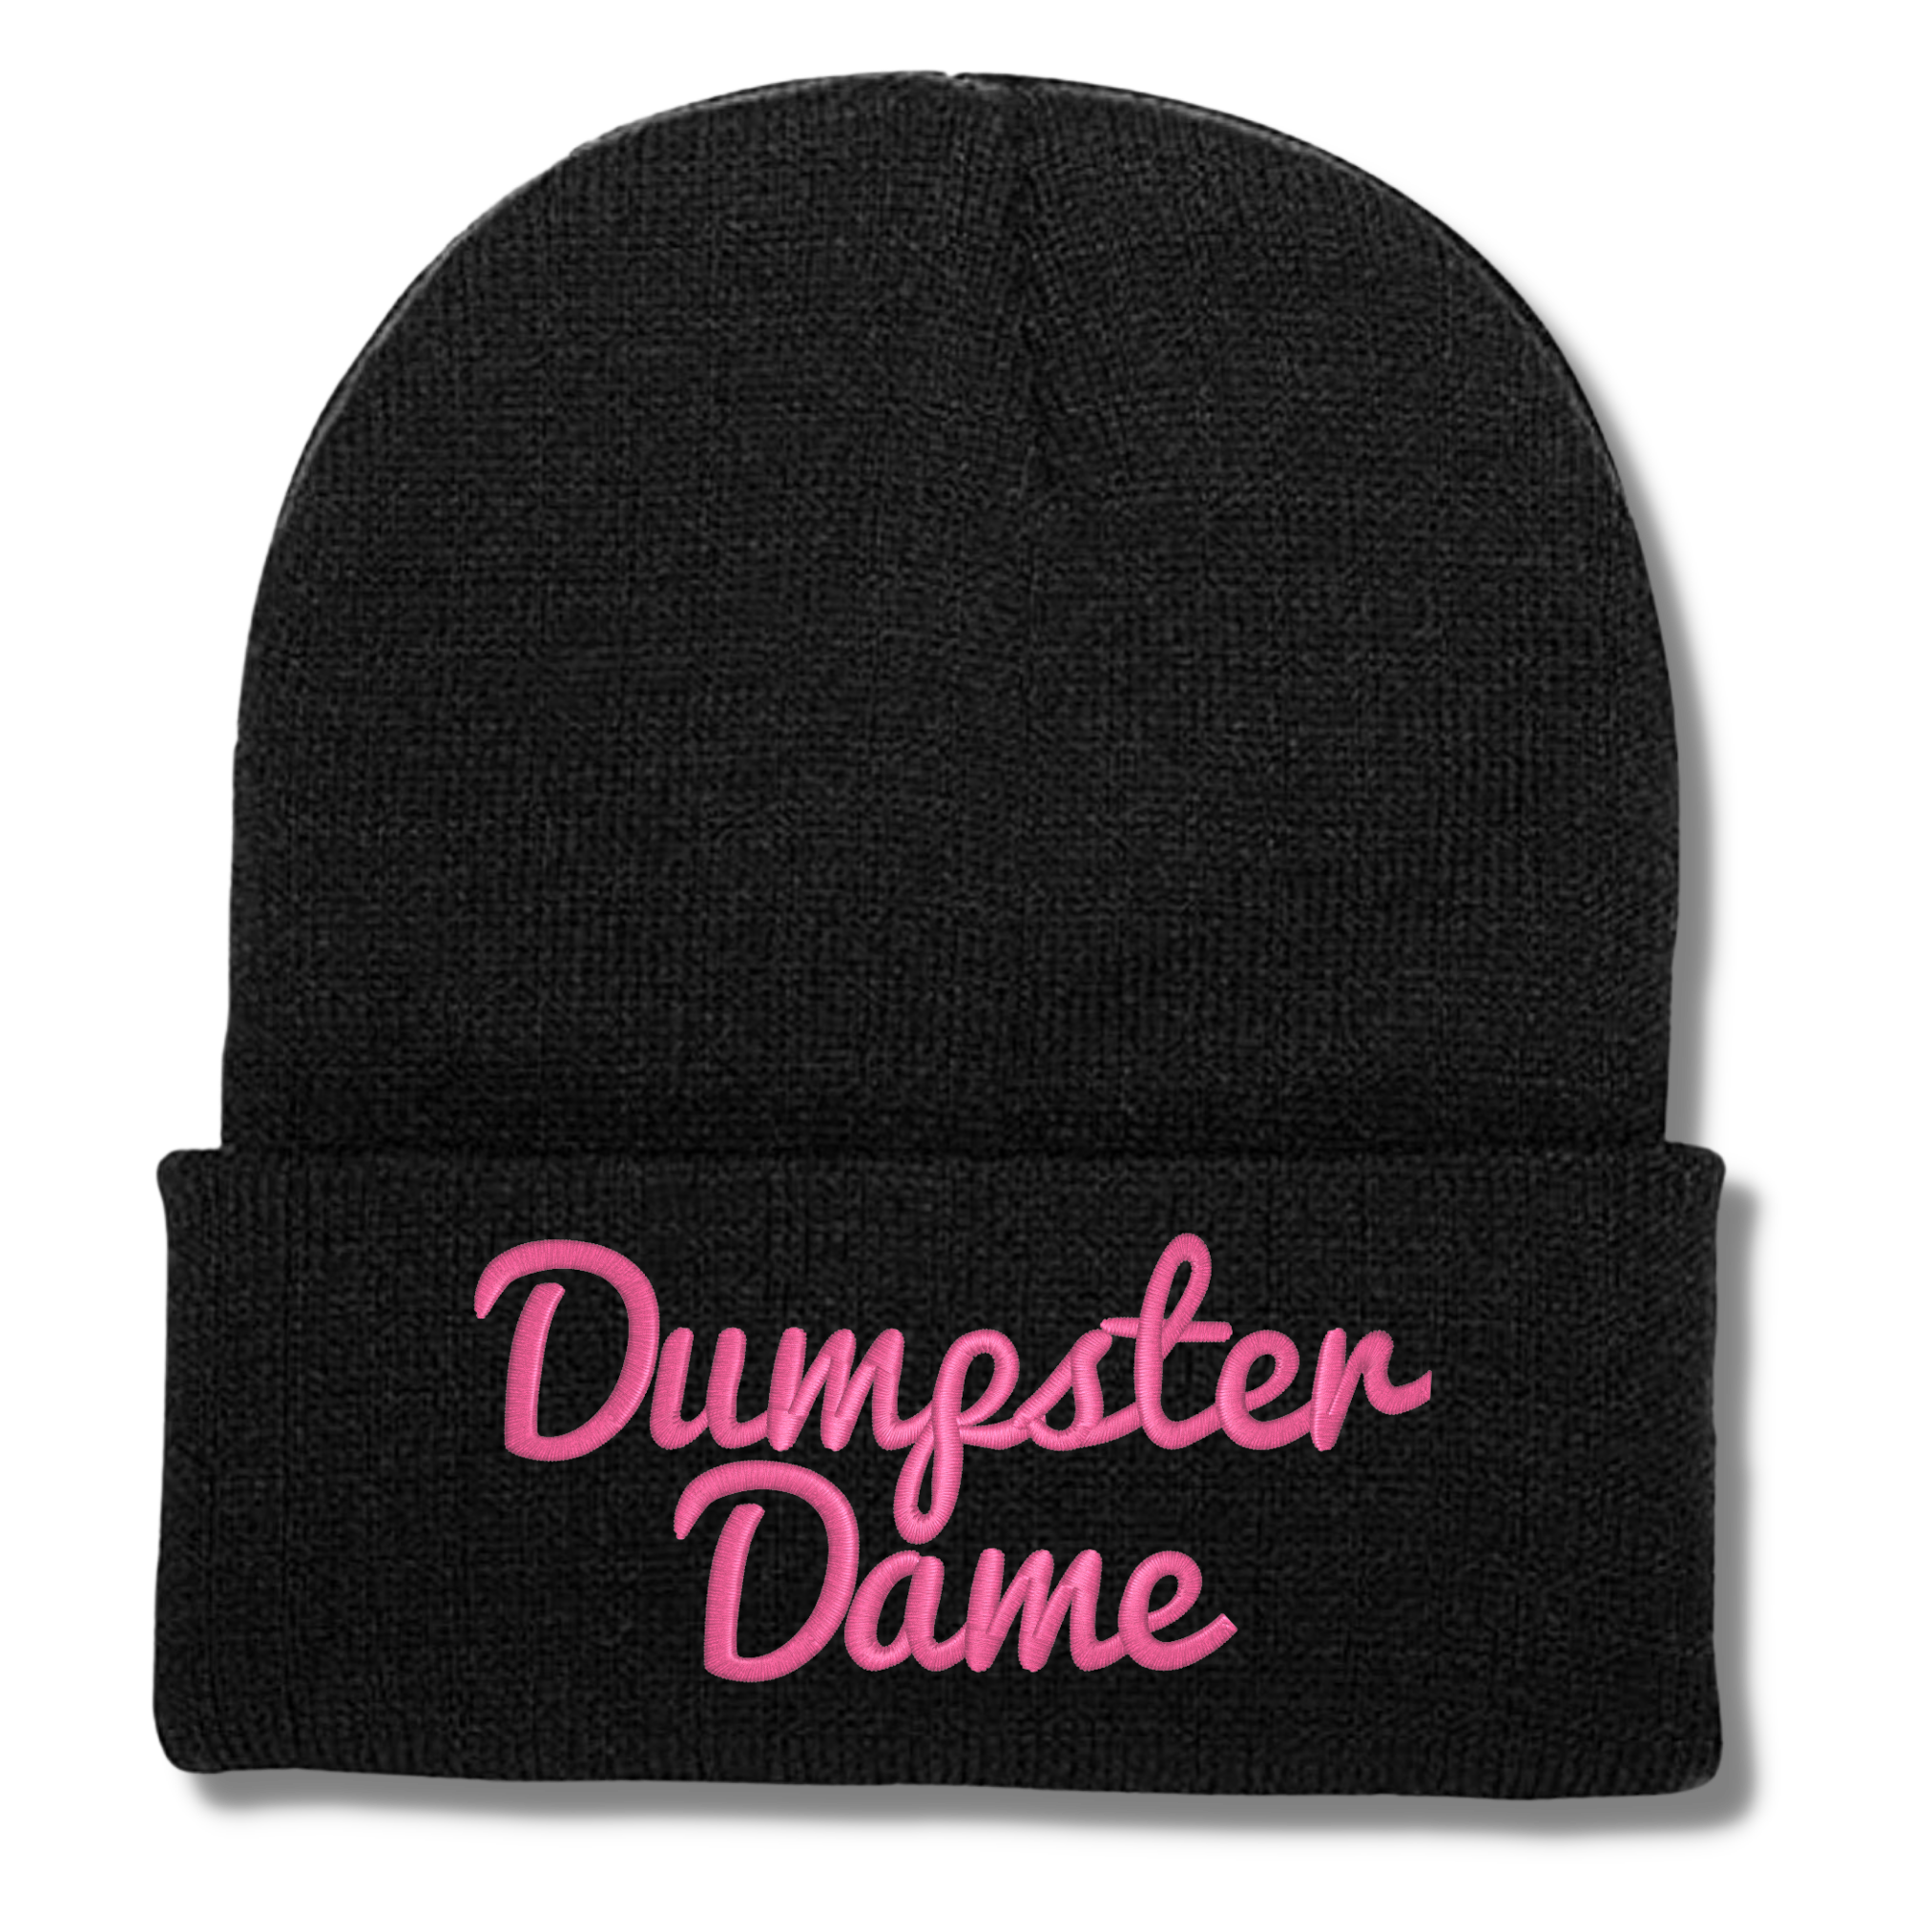 Dumpster Dame Embroidered Beanie Hat, One Size Fits All